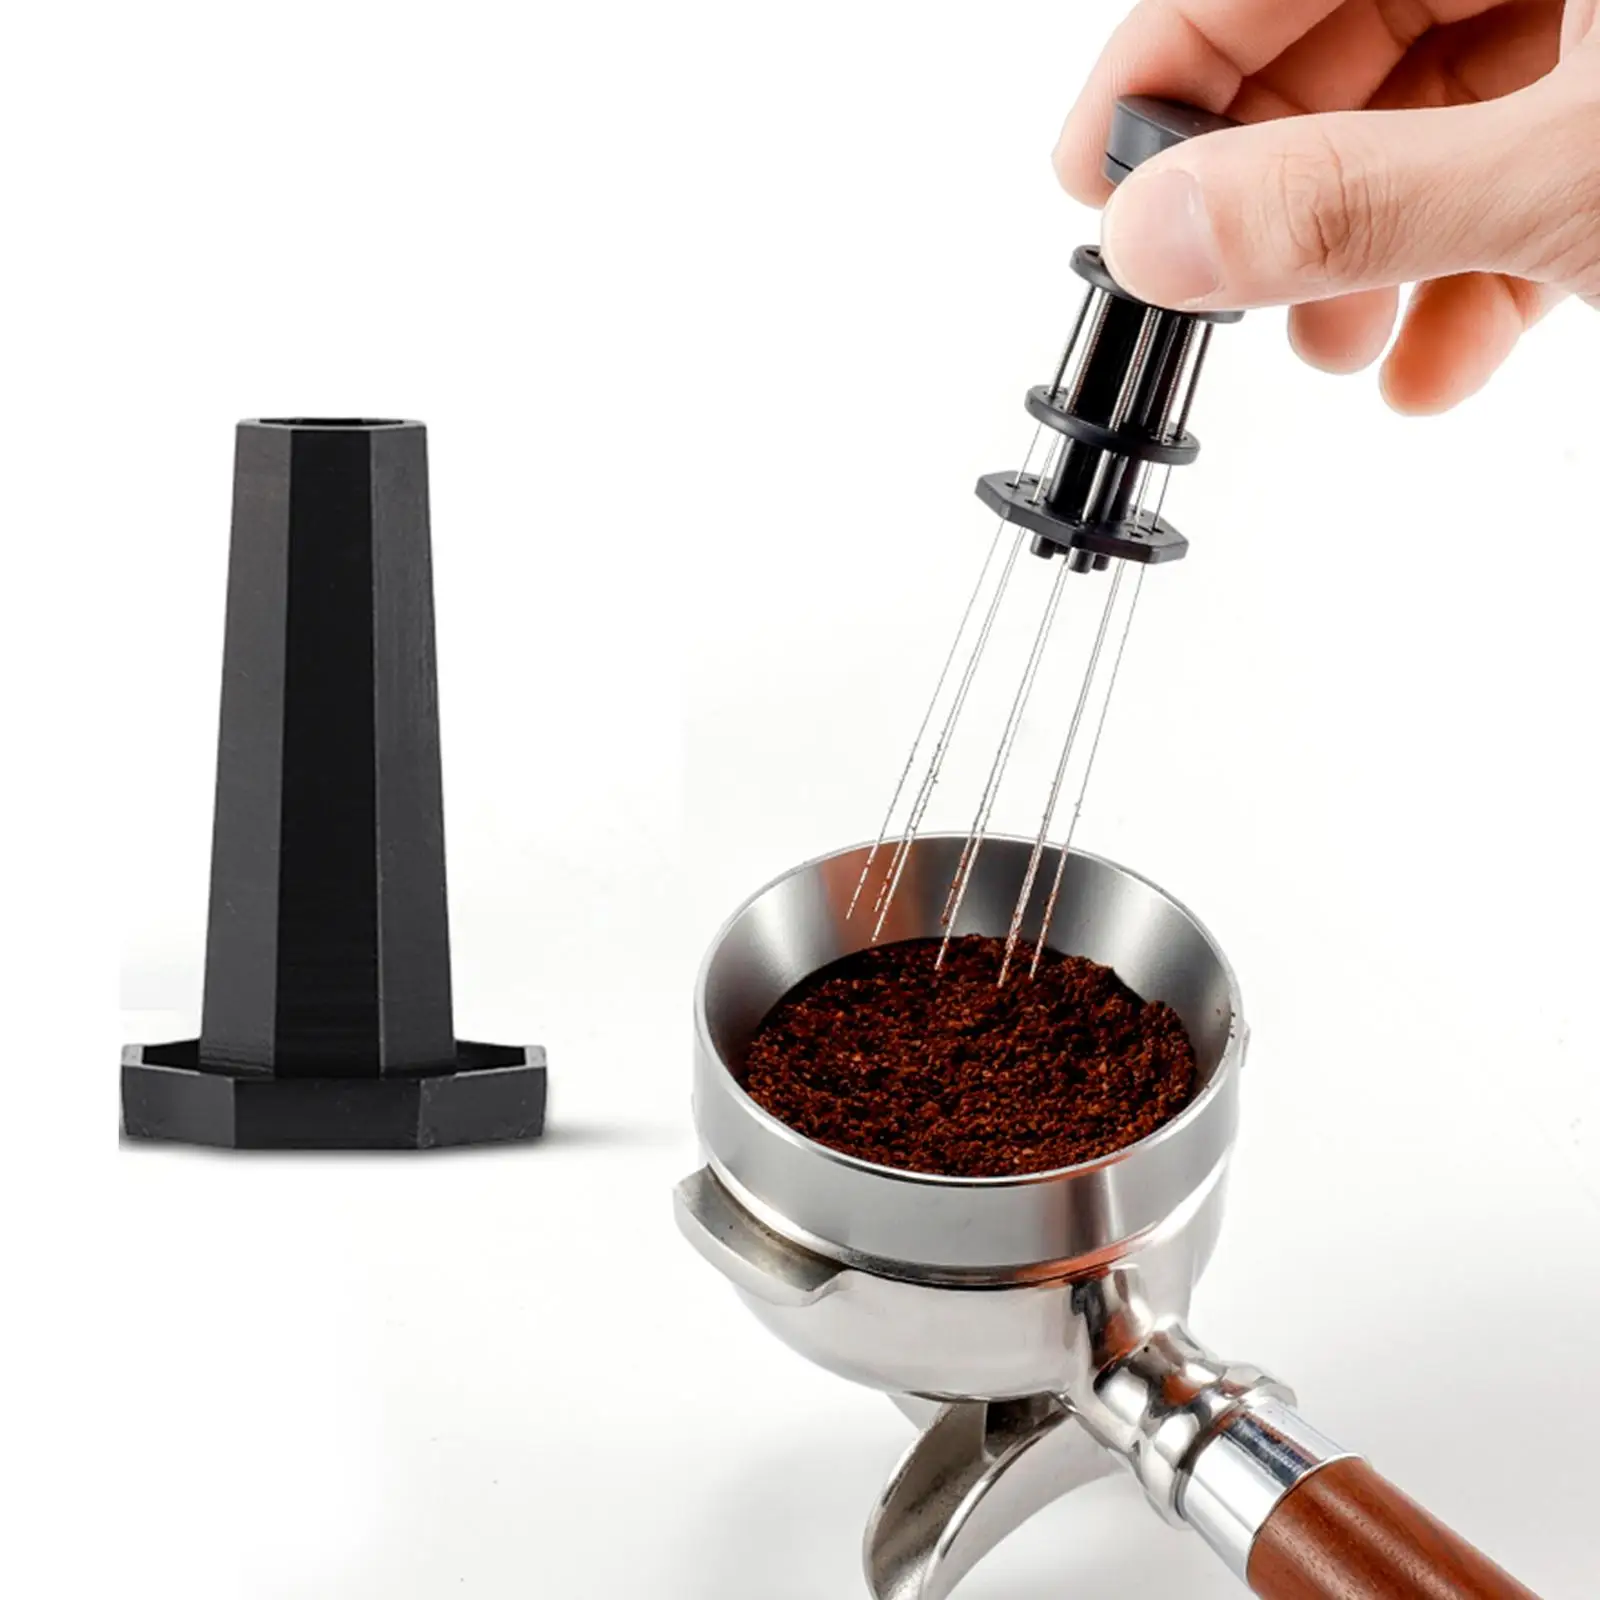 Adjustable Coffee Stirring Tool Coffee Grounds Needle with Stand Hand Tamper Needle Type Distributor for Office Cafe Kitchen